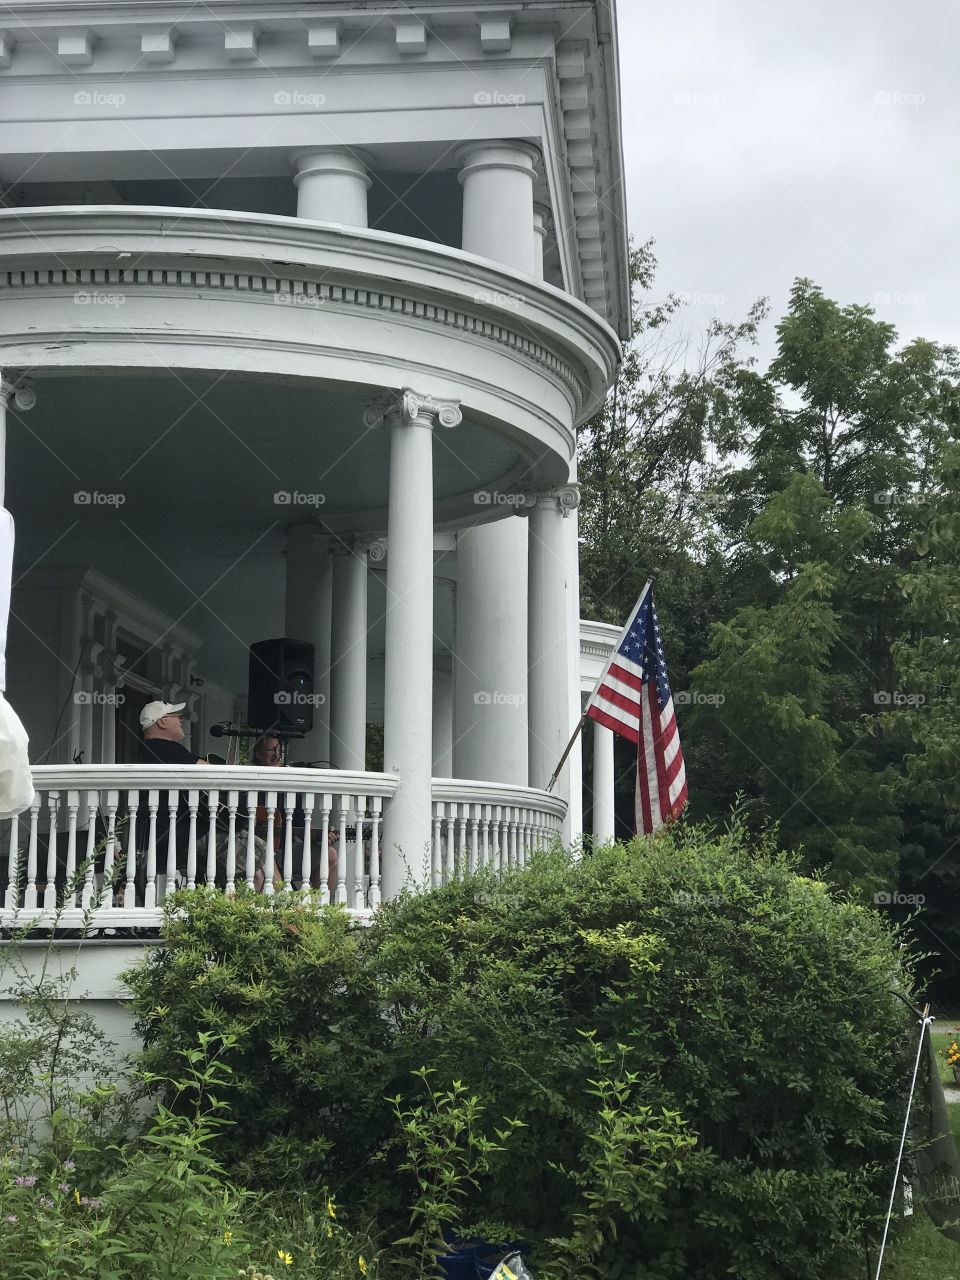 The Columns in Milford, Pennsylvania USA with Flag on front porch  